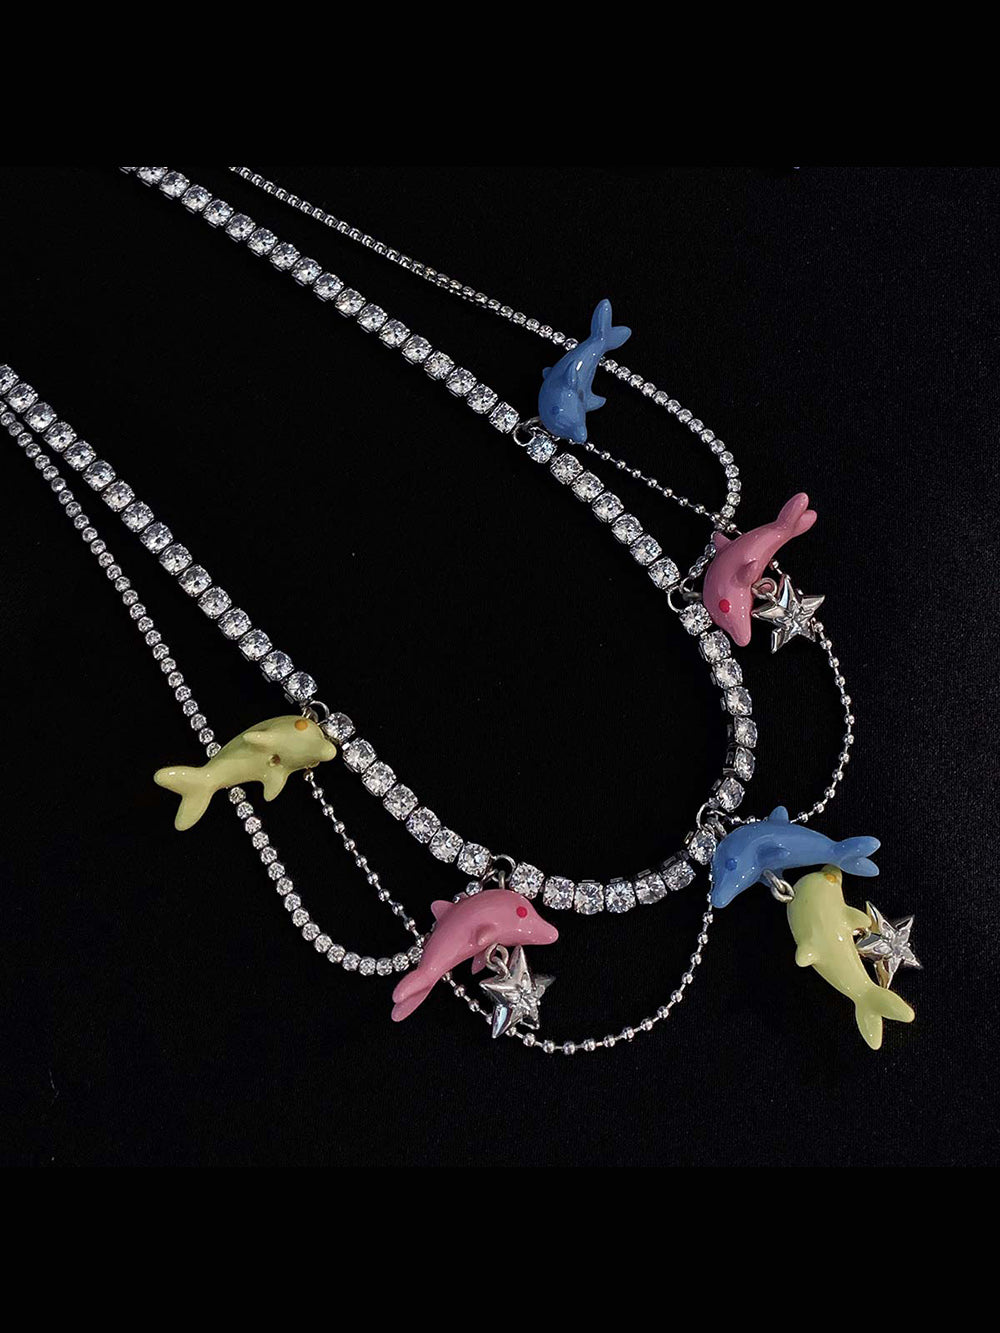 MUKTANK×GEL E LUA  Three-Color Dolphin Jumping Necklace